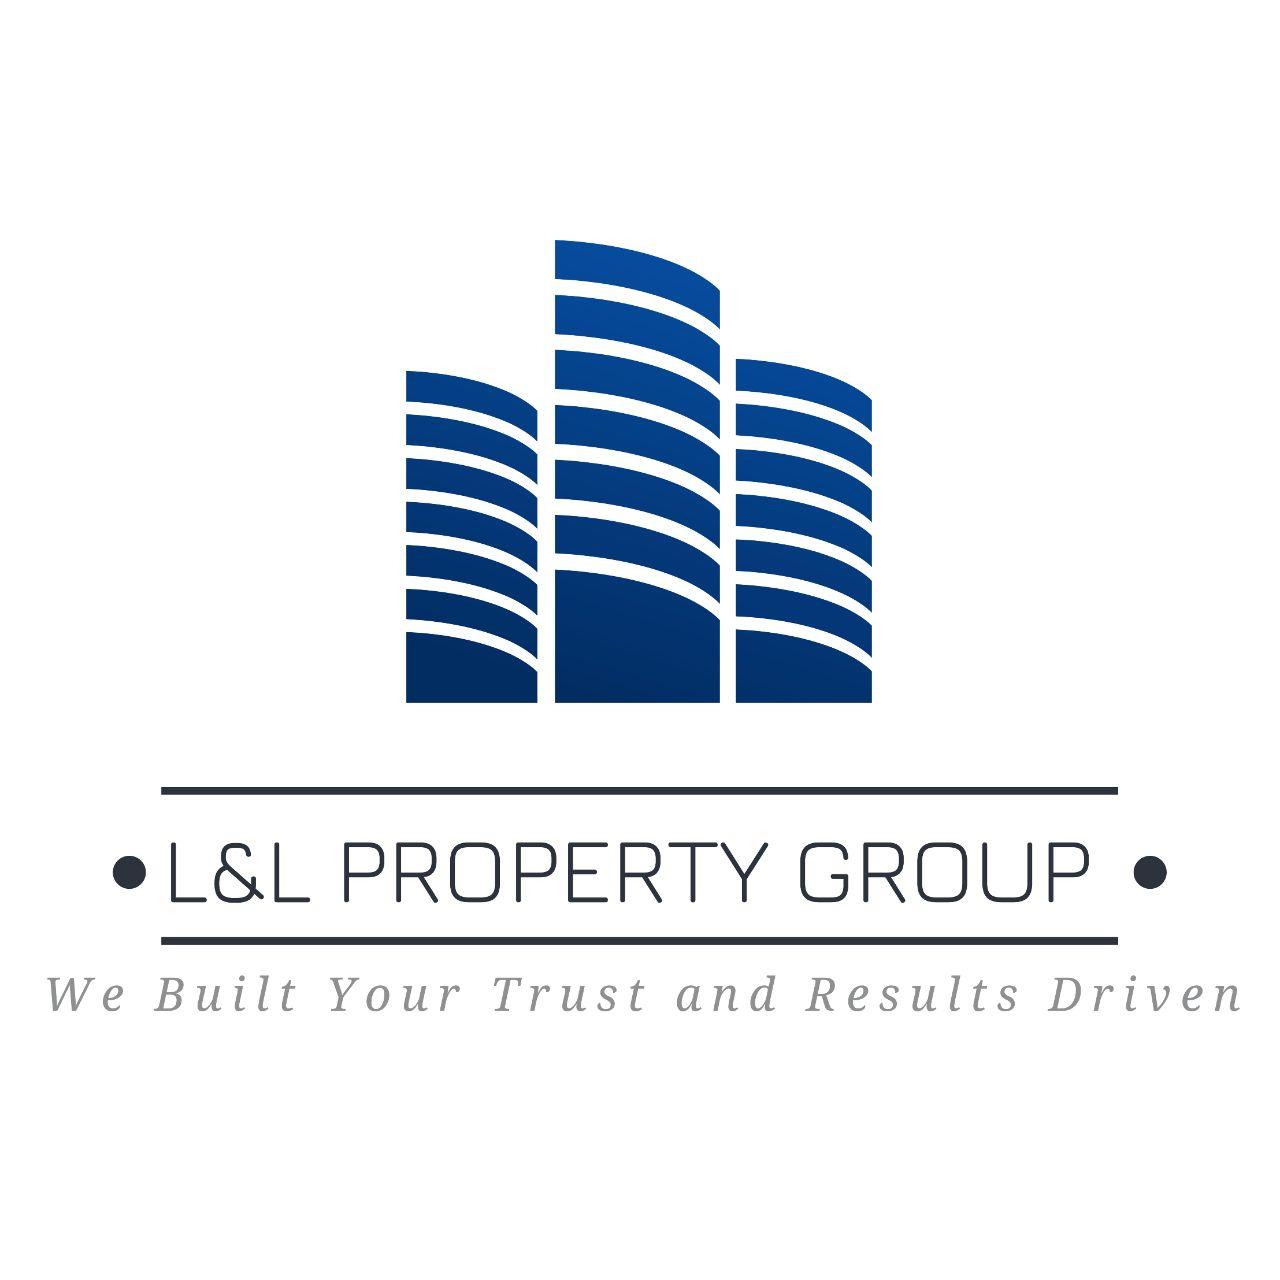 LL Property Group